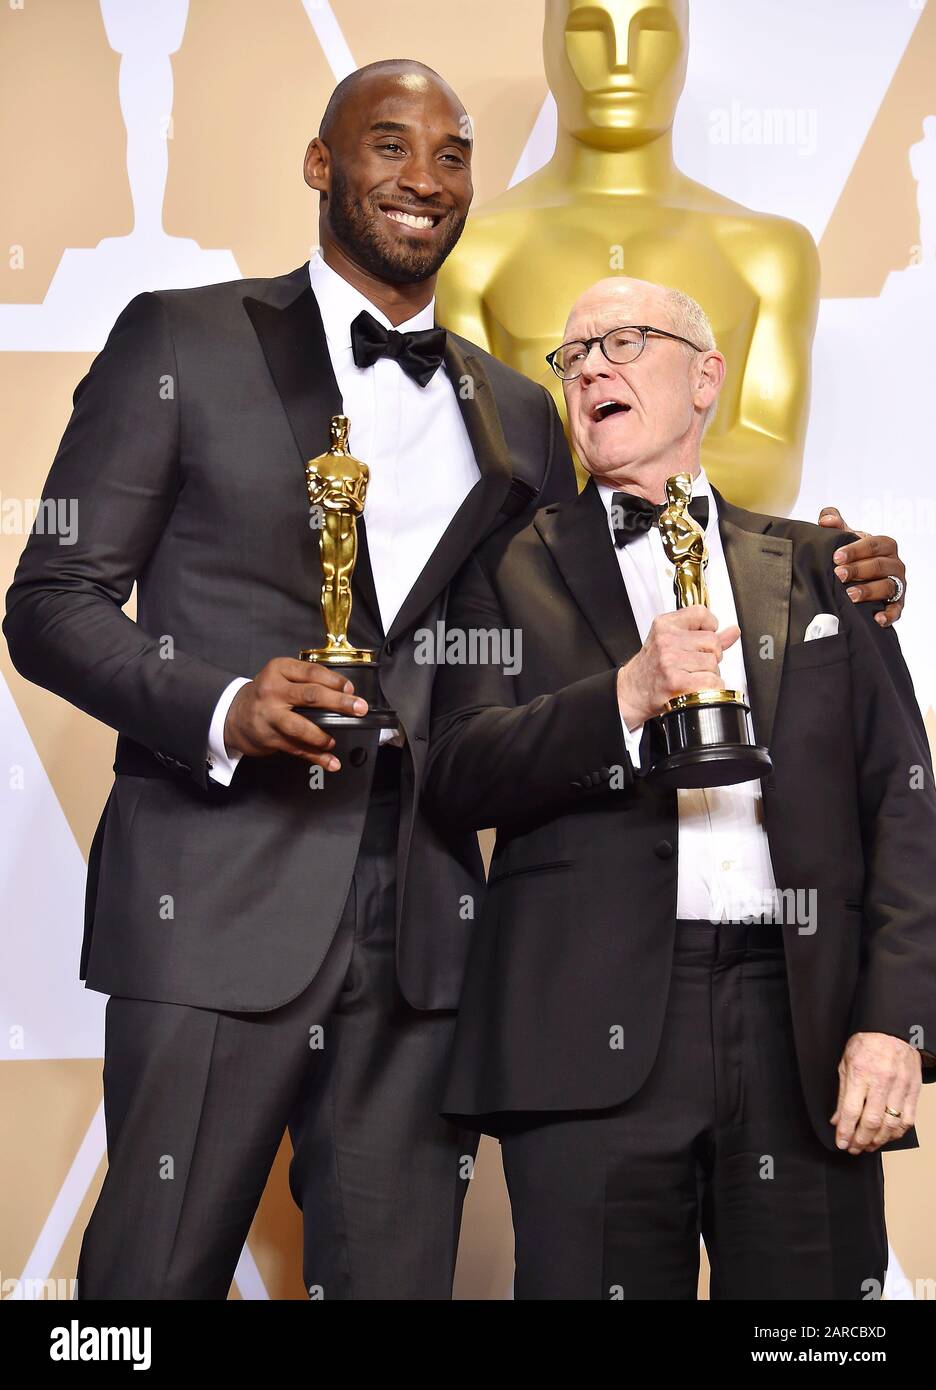 HOLLYWOOD, CA - MARCH 04: Filmmakers Kobe Bryant (L) and Glen Keane, winners of the Animated Short award for ?Dear Basketball? pose in the press room during the 90th Annual Academy Awards at Hollywood & Highland Center on March 4, 2018 in Hollywood, California. Stock Photo